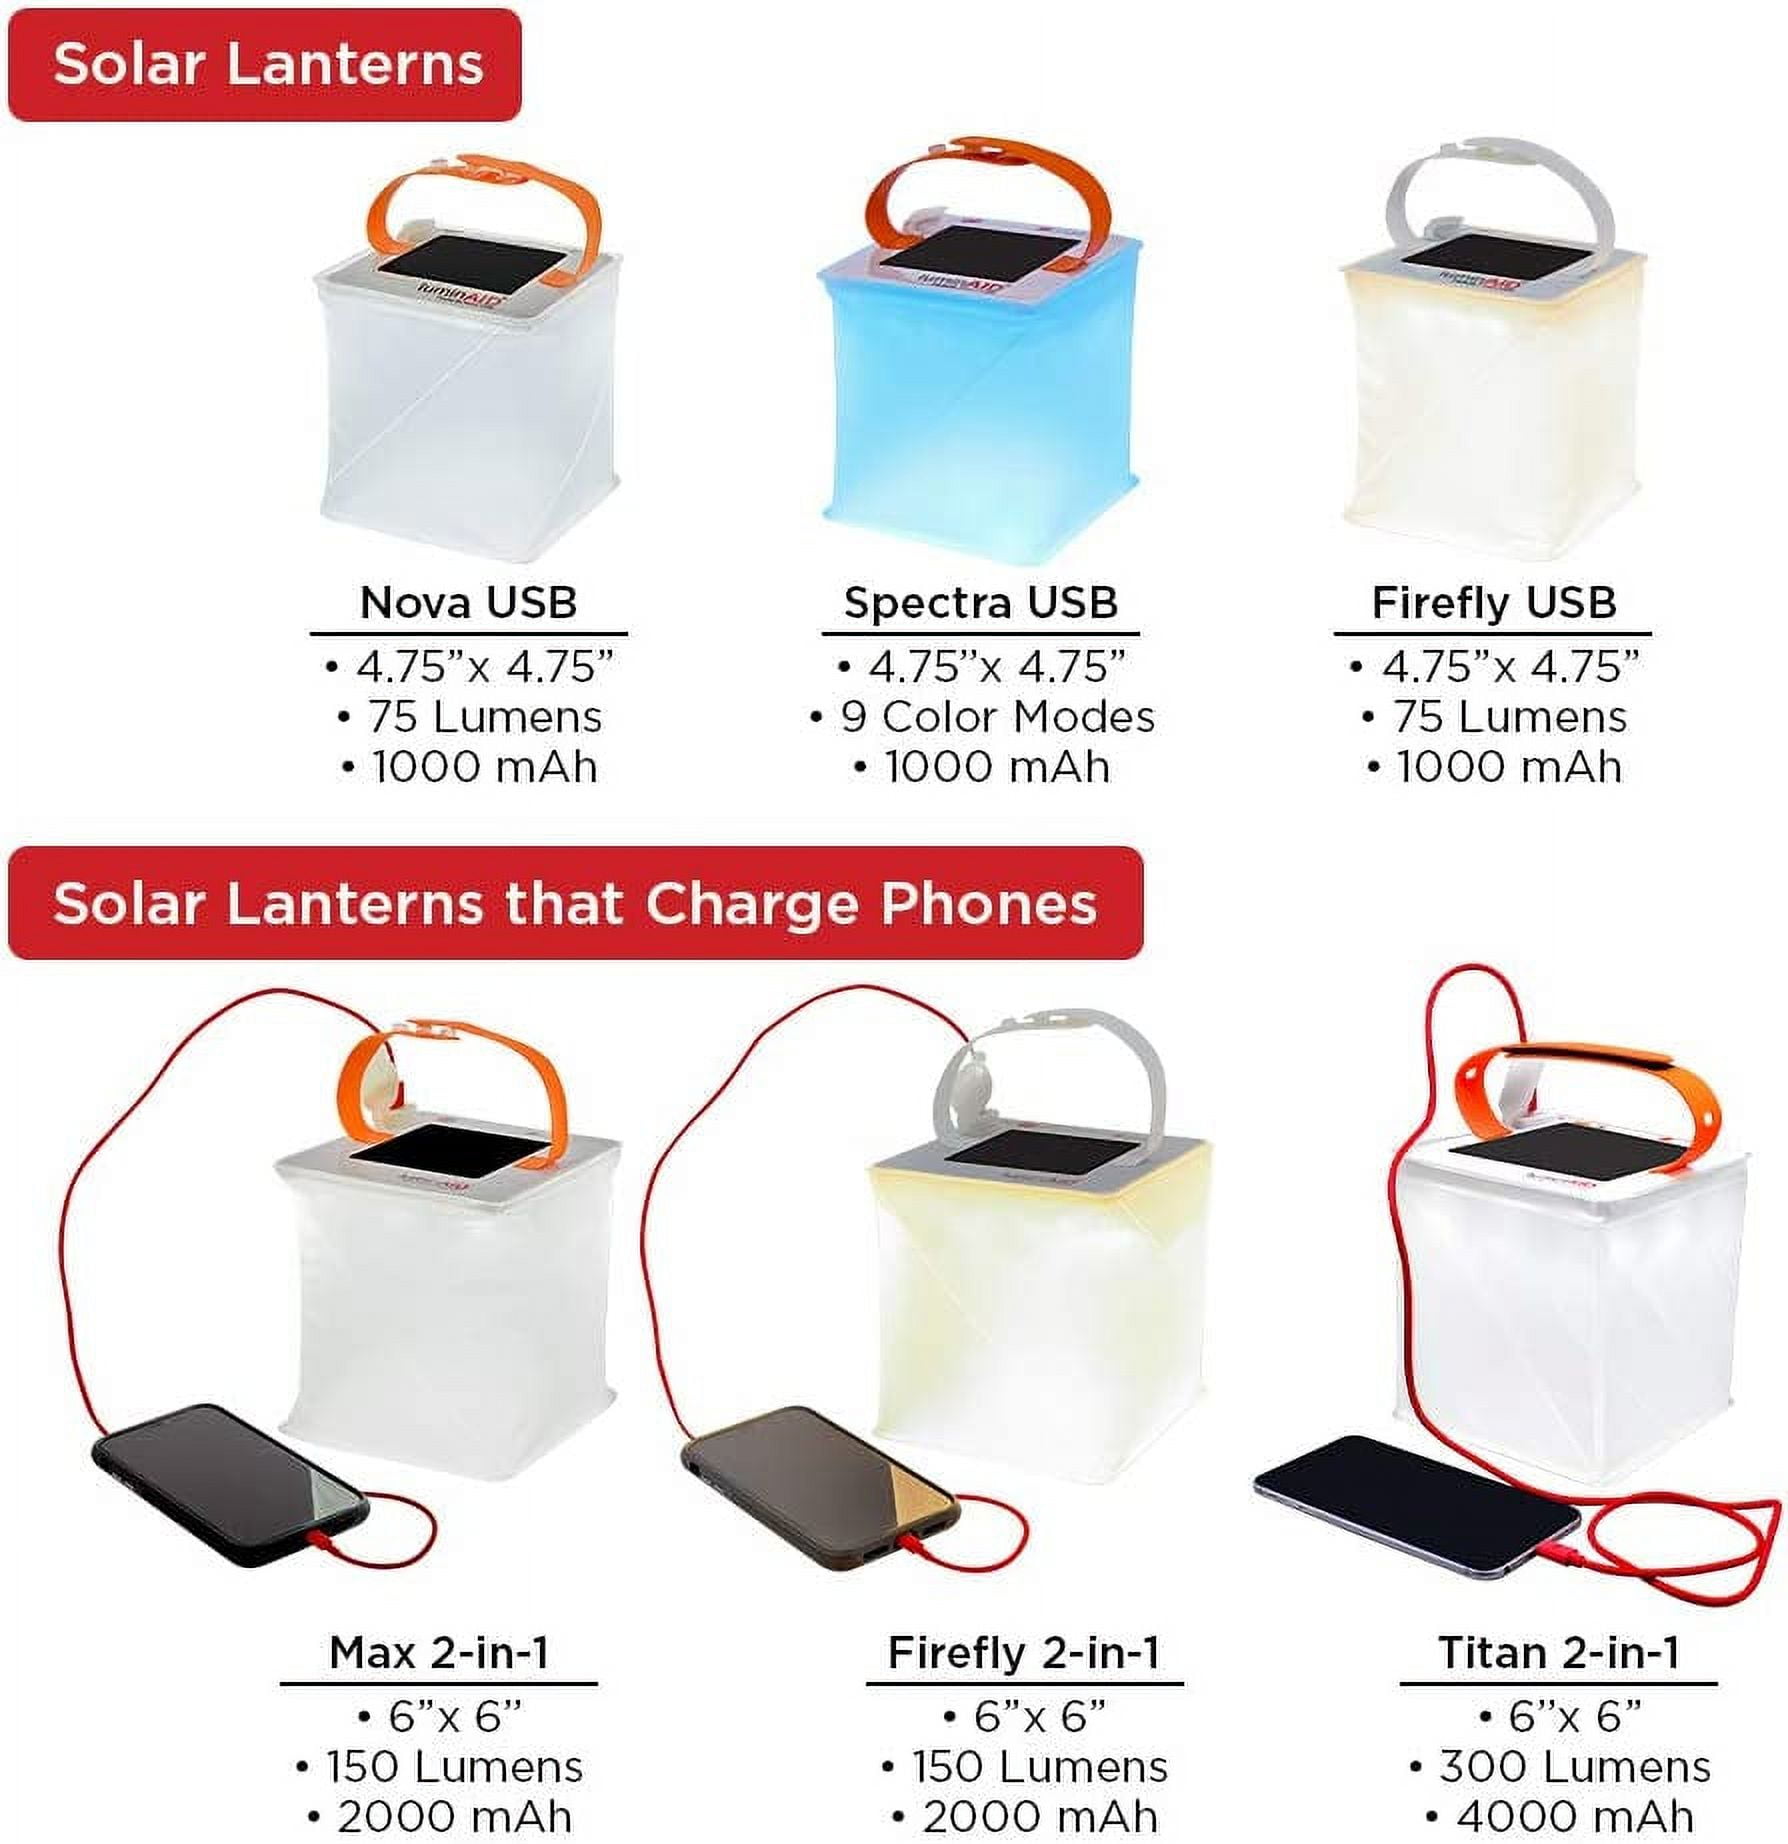 LuminAID Completes and Exceeds Kickstarter Goal for New Phone-Charging